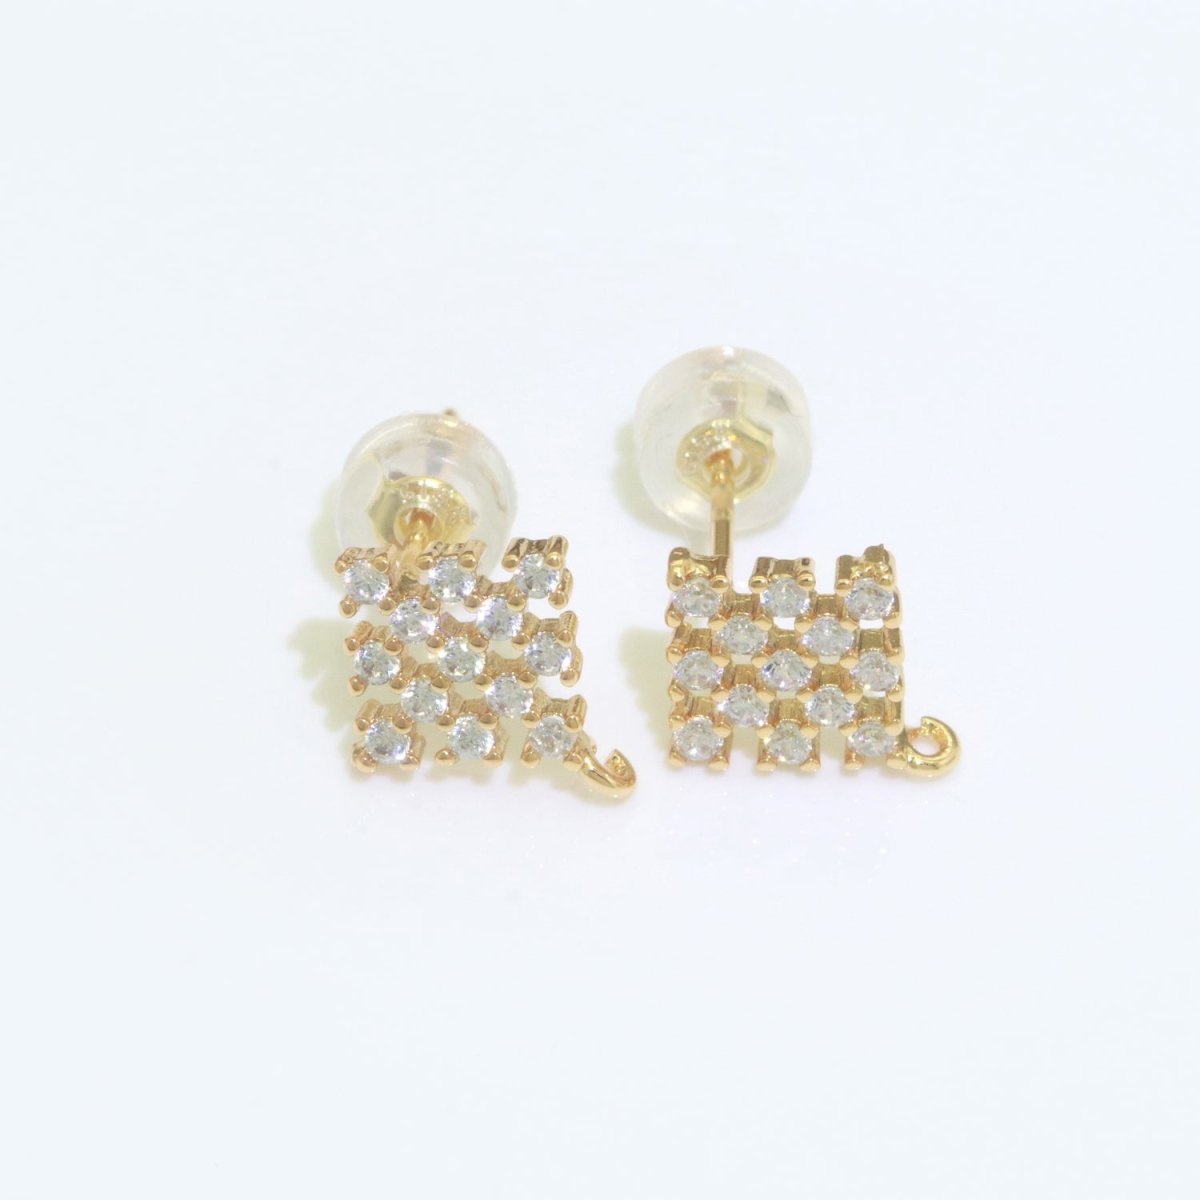 Micro Paved Clear Cubic Zirconia Checkered Rhombus Gold Studs Open Loop Drop Earrings Supply L-490 - DLUXCA